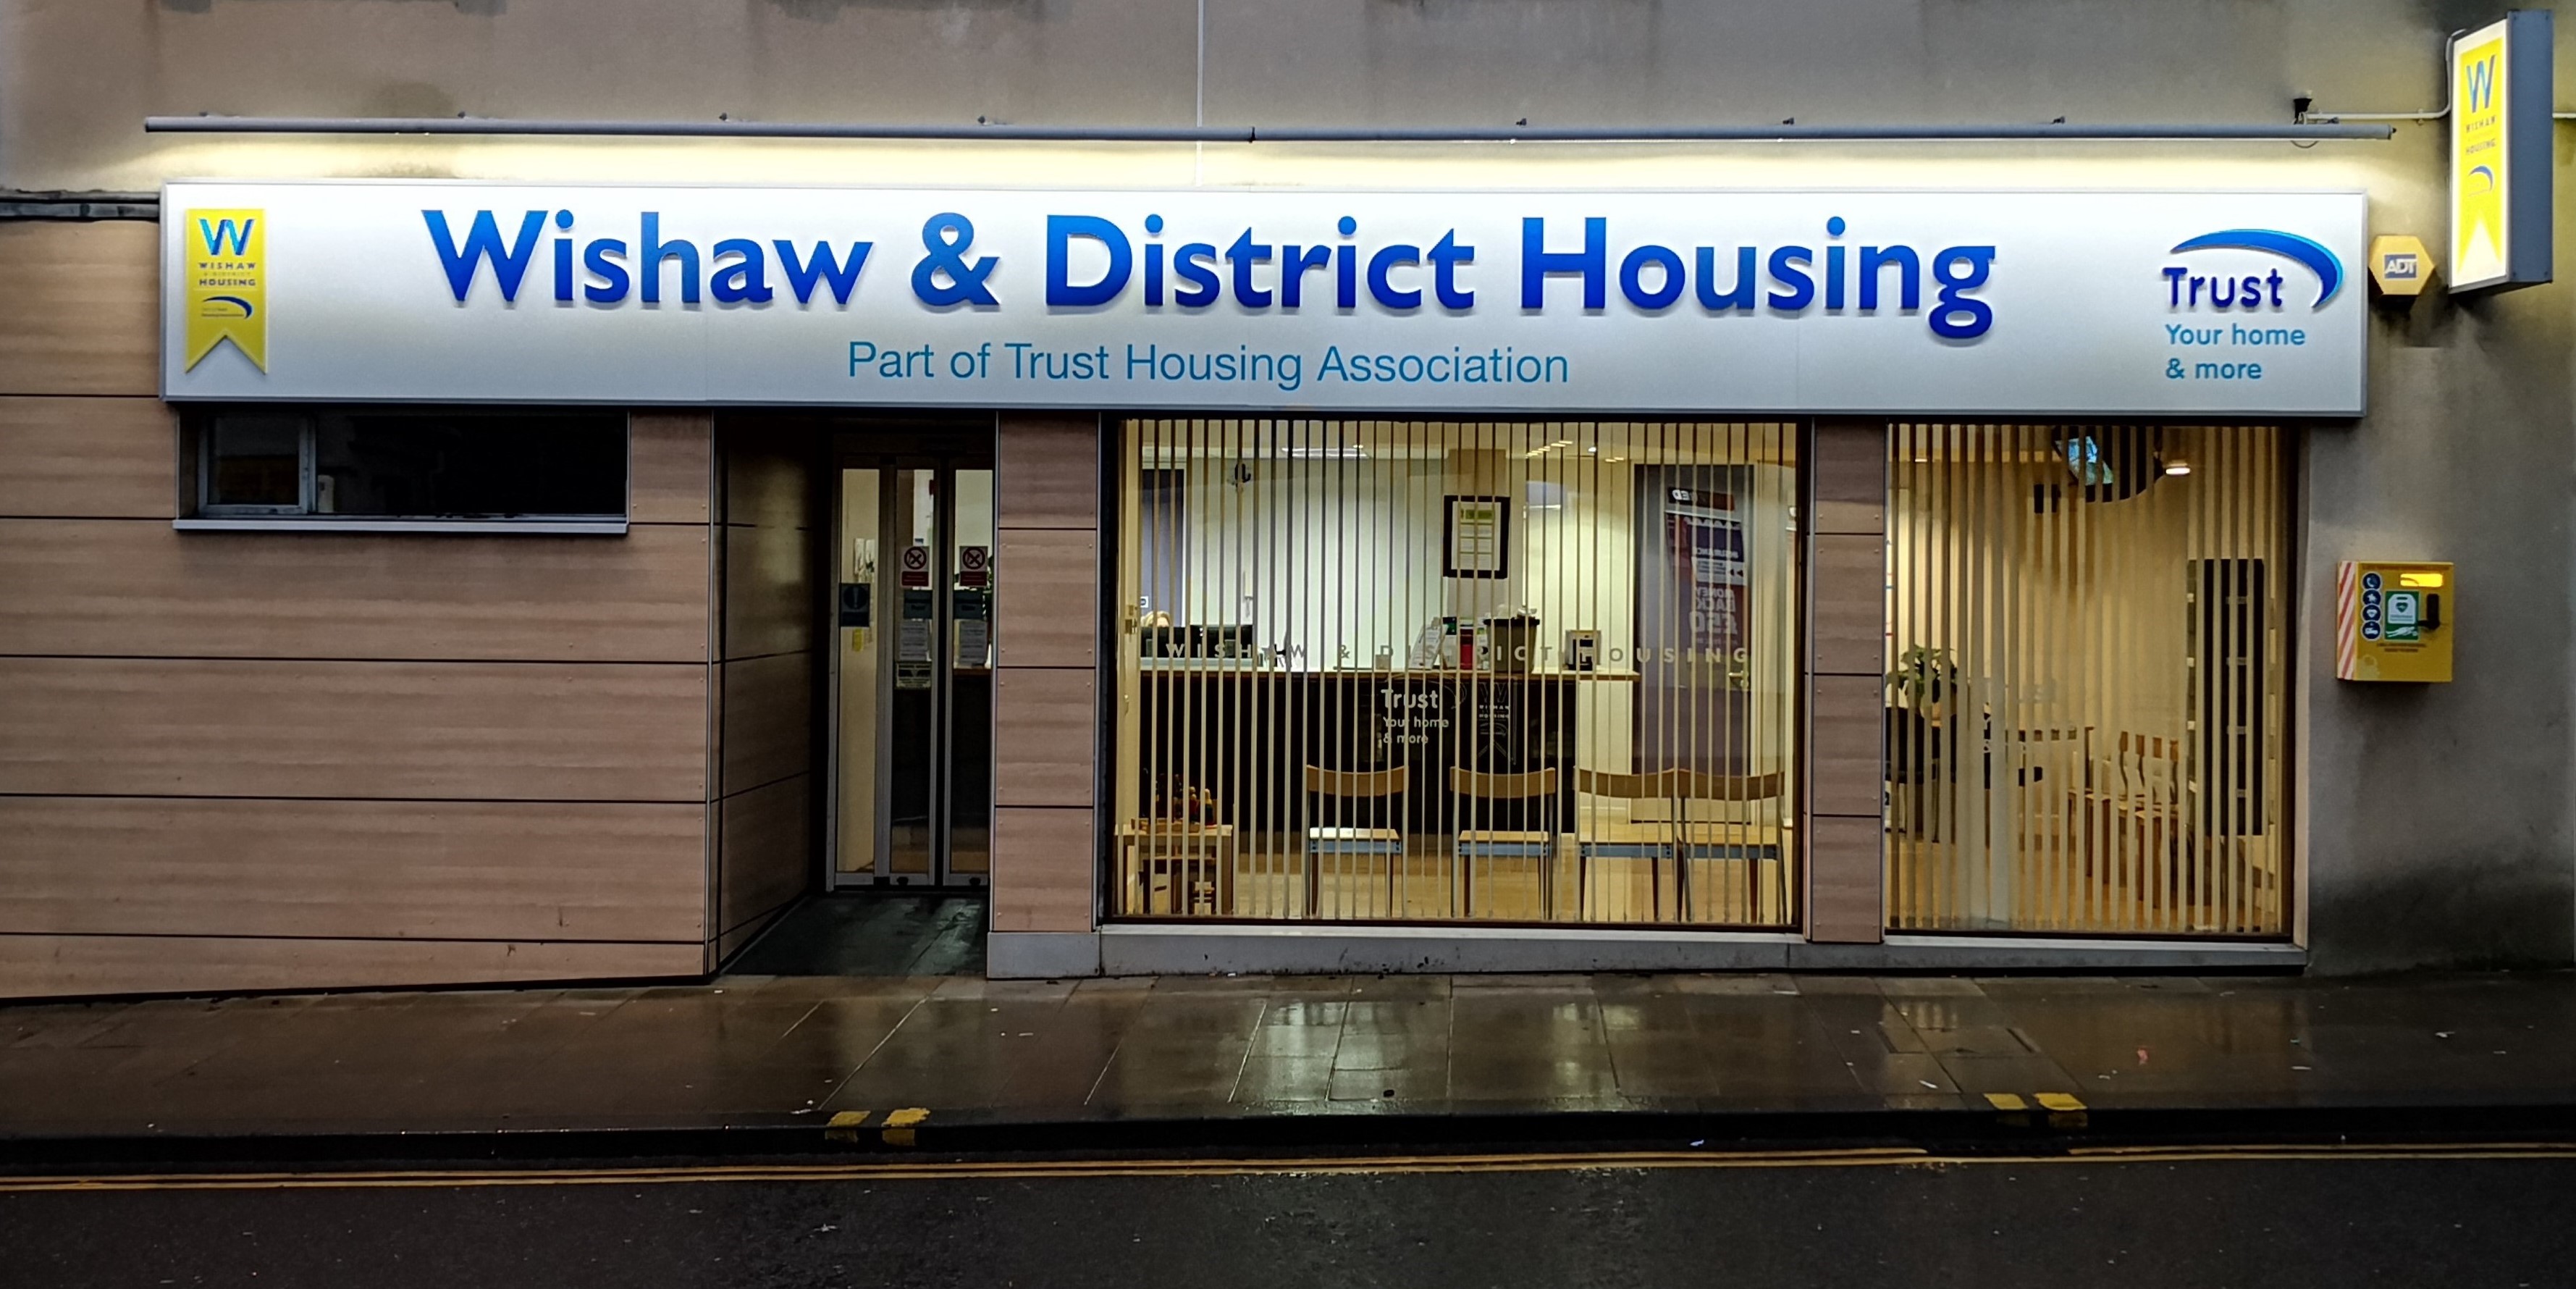 Regulator publishes outcome of statutory intervention at Wishaw & District Housing Association